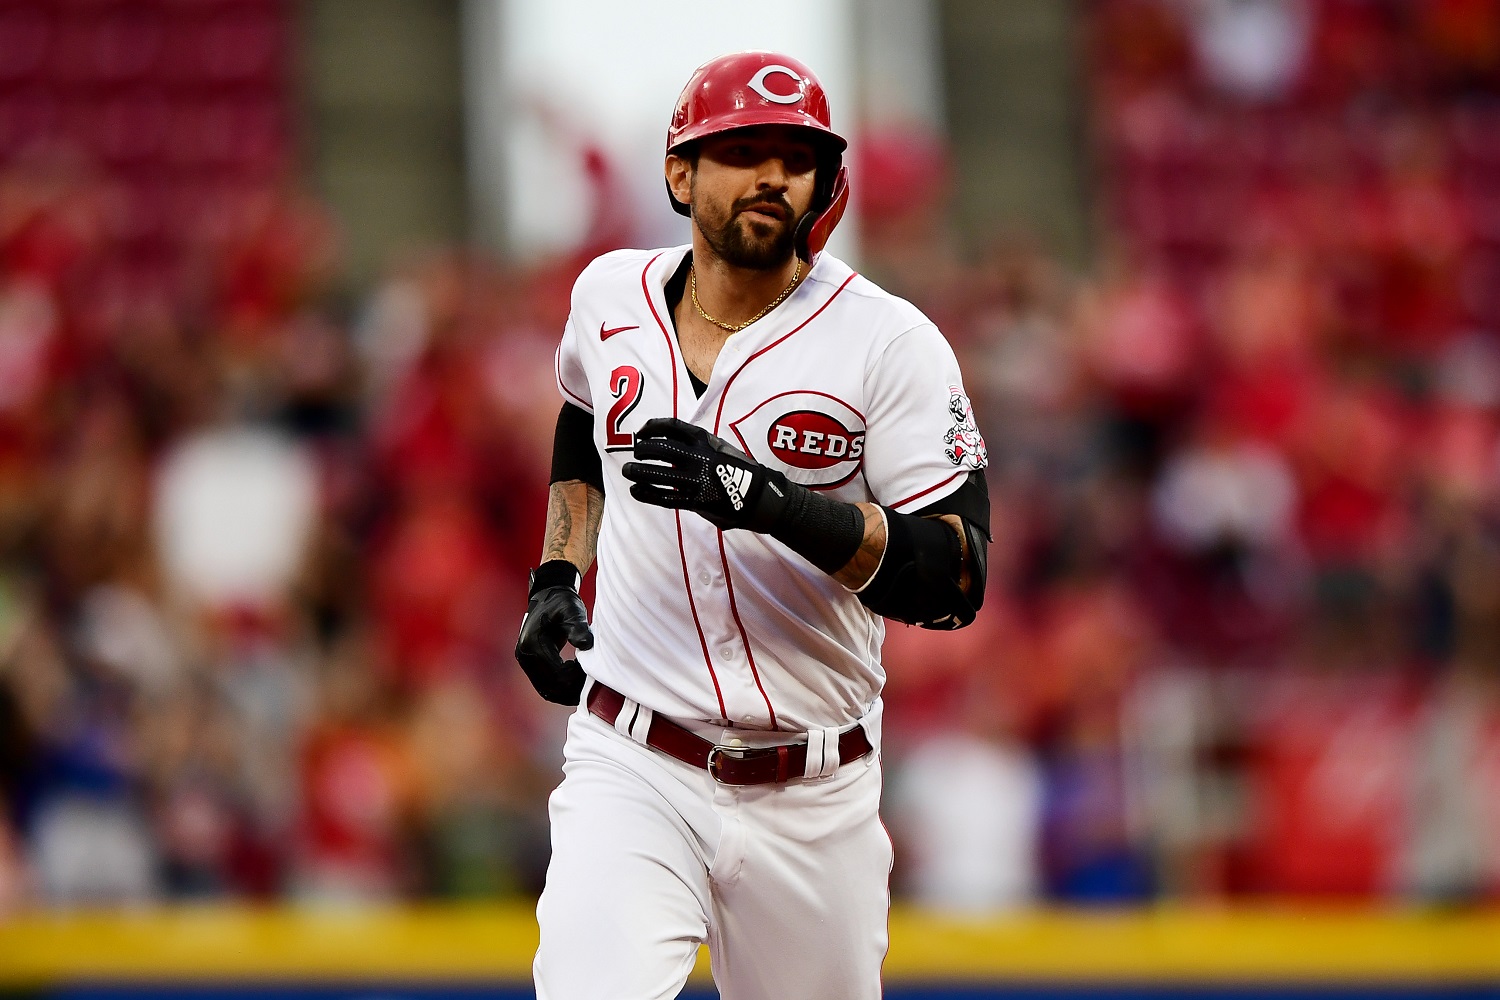 Nick Castellanos of the Cincinnati Reds circles the bases after hitting a three-run home run against the San Diego Padres at Great American Ball Park on June 30, 2021.